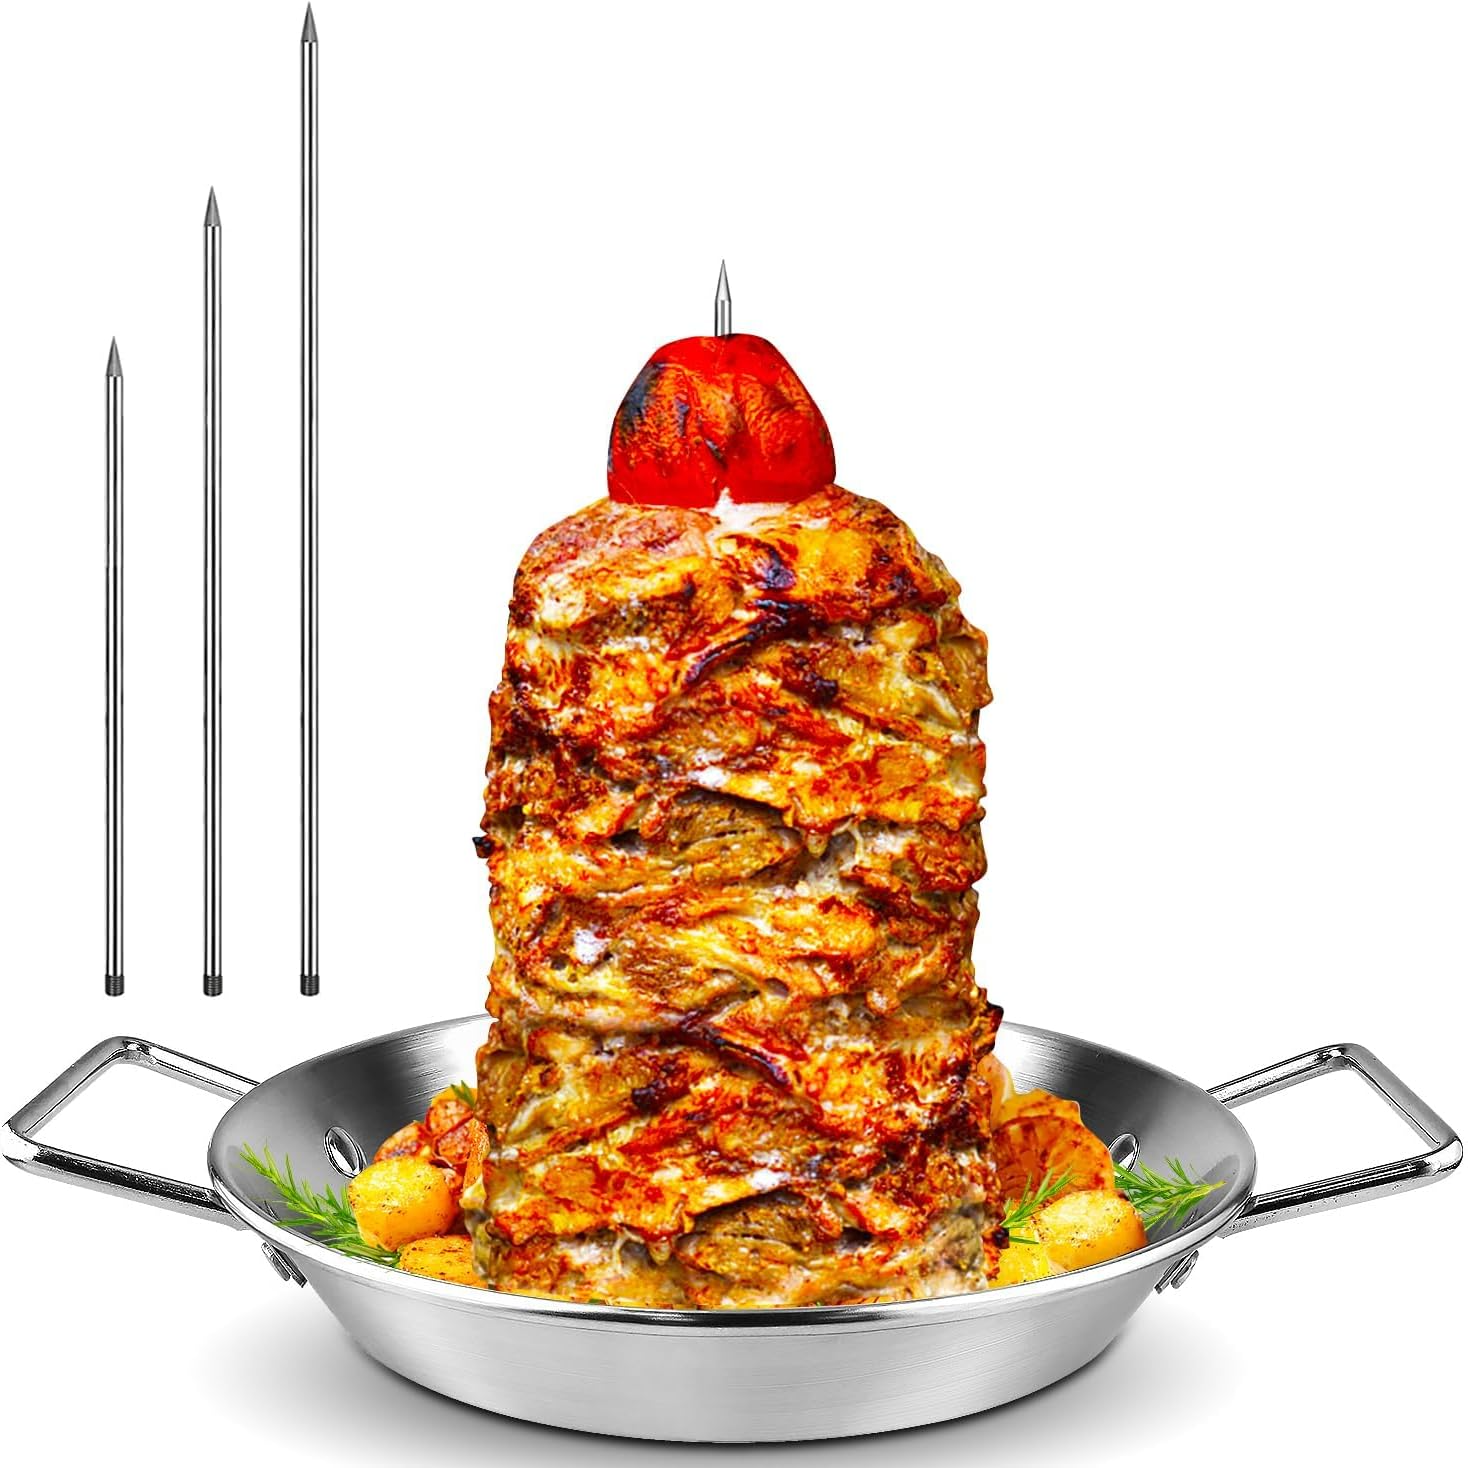 Al Pastor Skewer for Grill -Vertical Barbecue Stand Al Pastor, Kebabs, Shawarma, Gyros, with 10.5 inch base plate and 3 detachable sharp barbecue accessories (8 inches, 10 inches, and 12 inches) - Barbecue Whizz...Watch My Smoke!